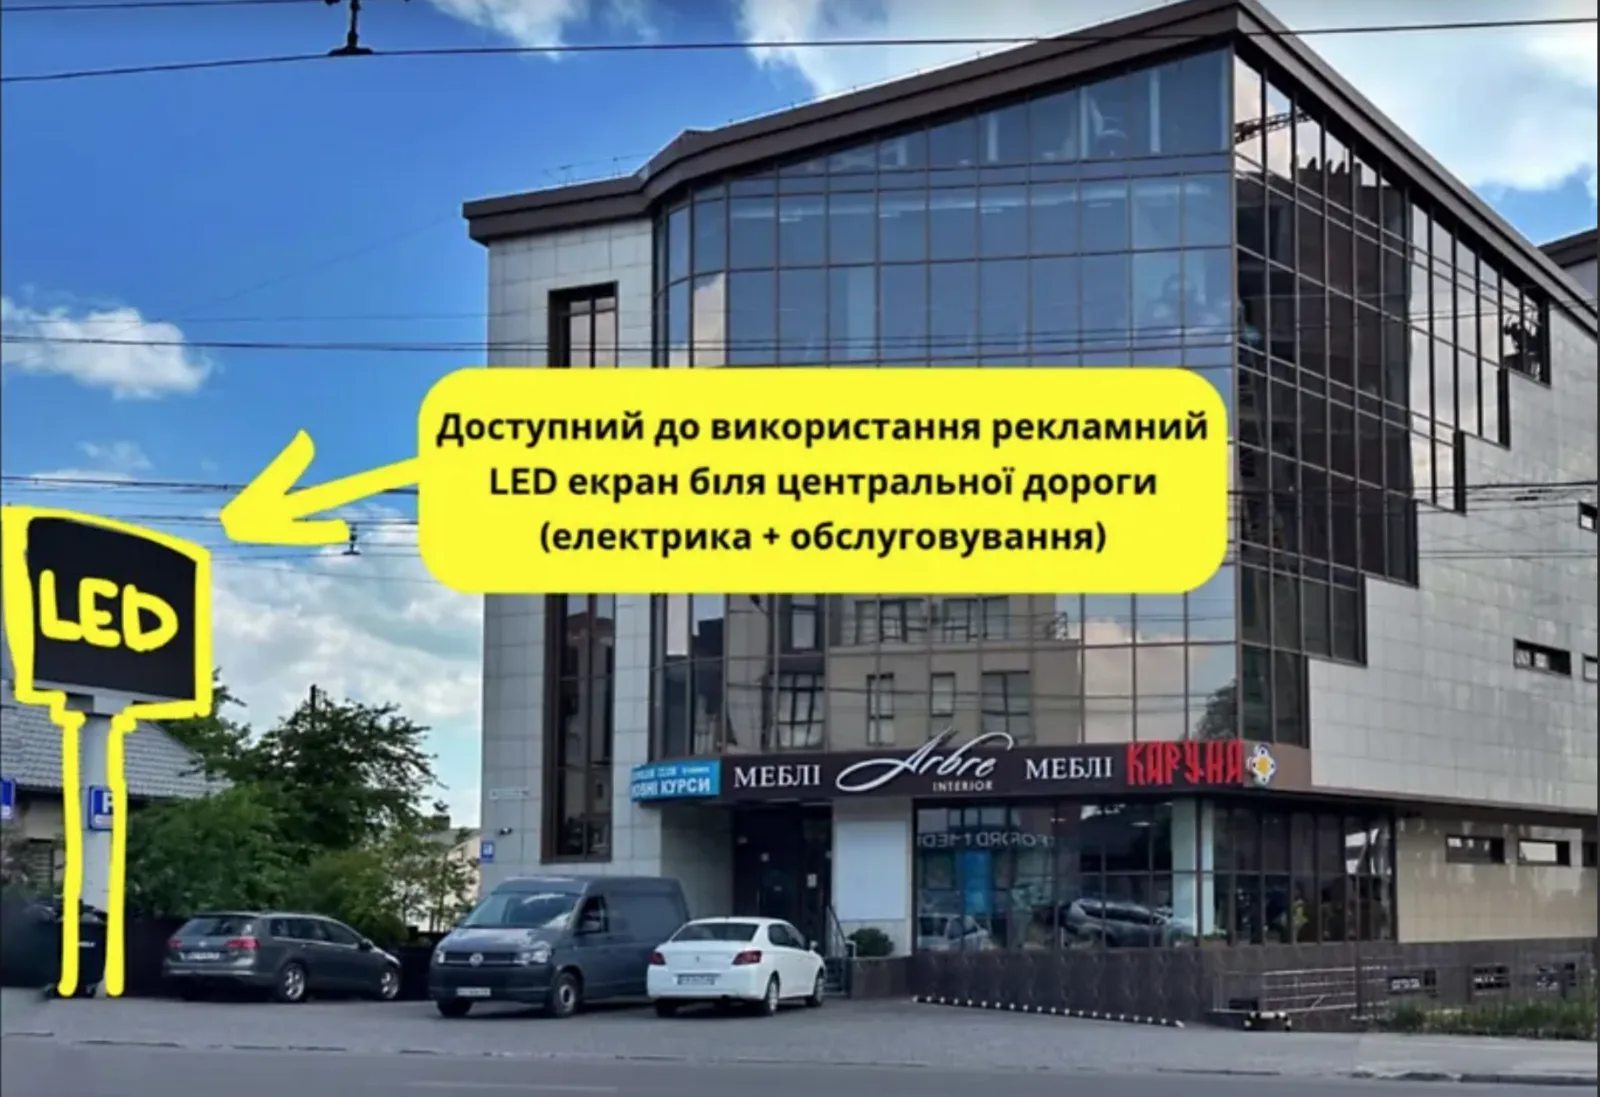 Real estate for sale for commercial purposes. 312 m², 1st floor/5 floors. Vostochnyy, Ternopil. 